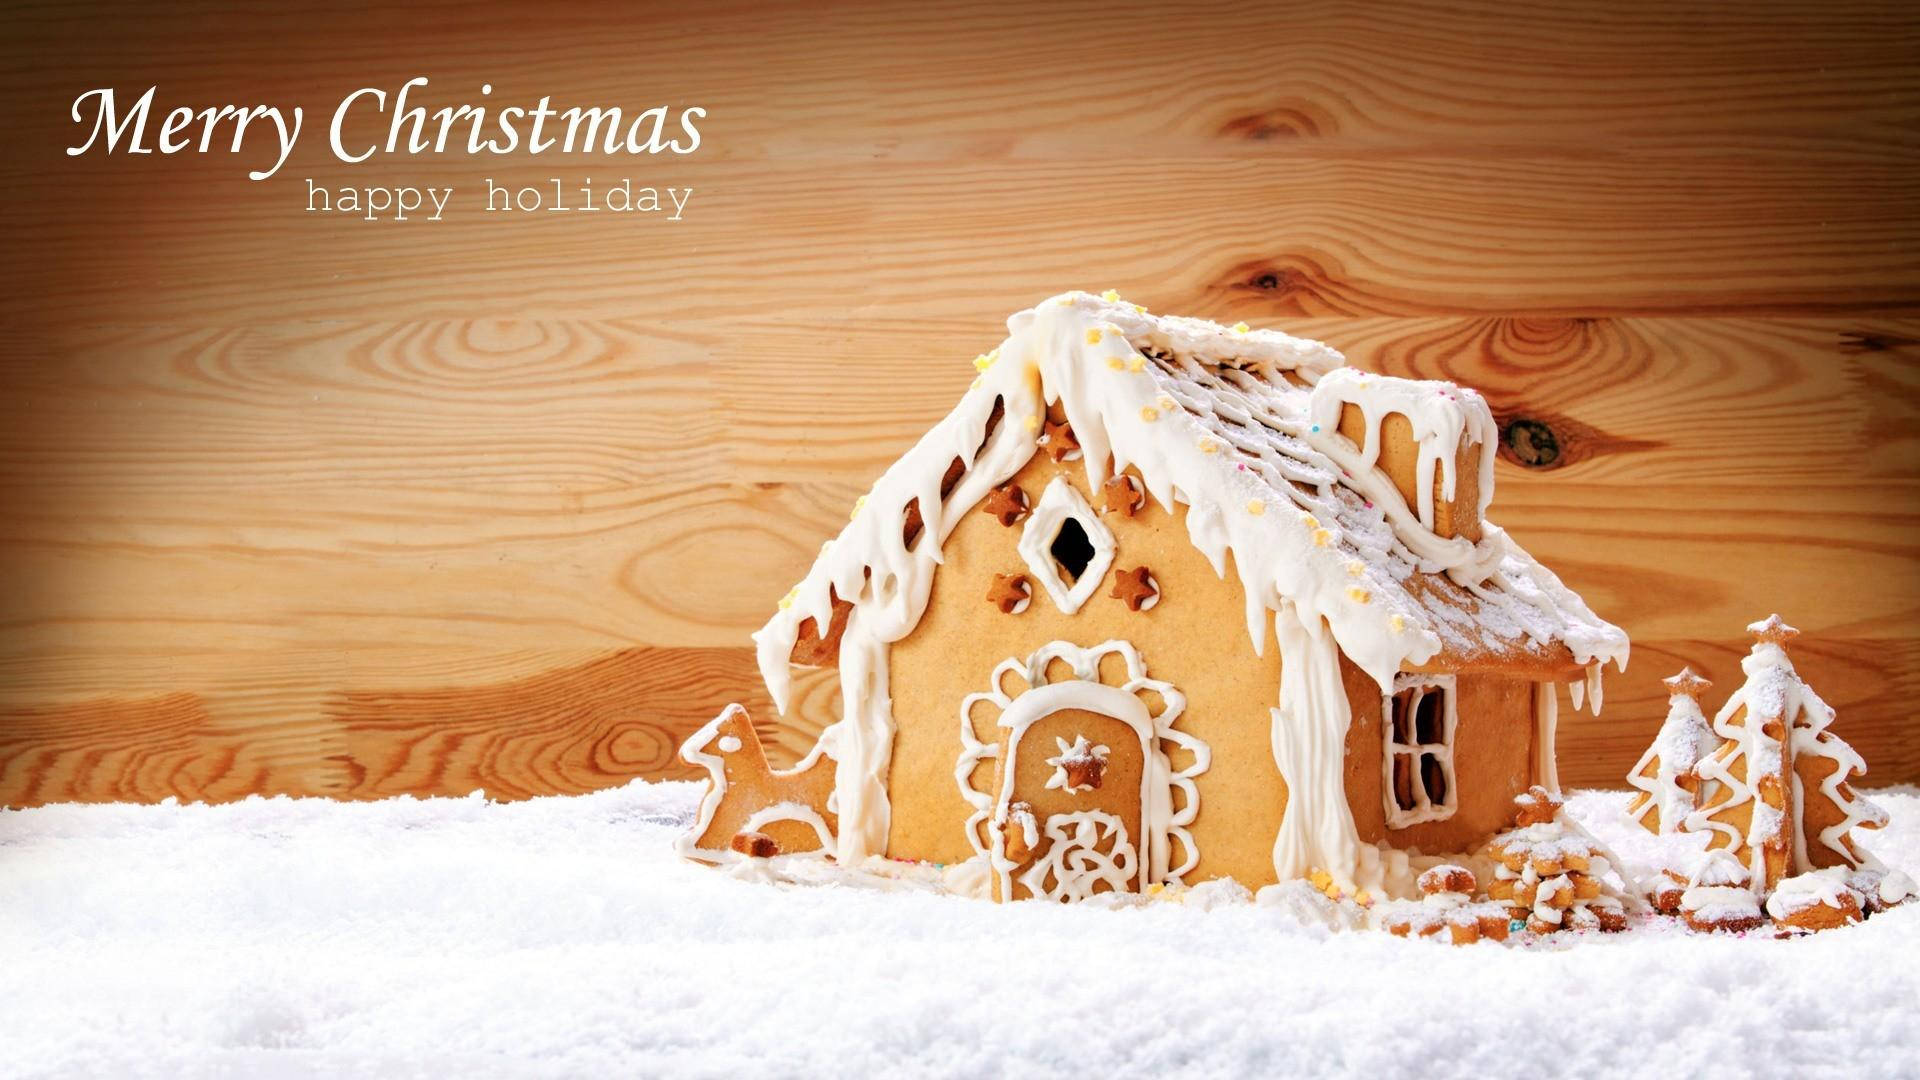 Happy Holidays Gingerbread House Poster Background